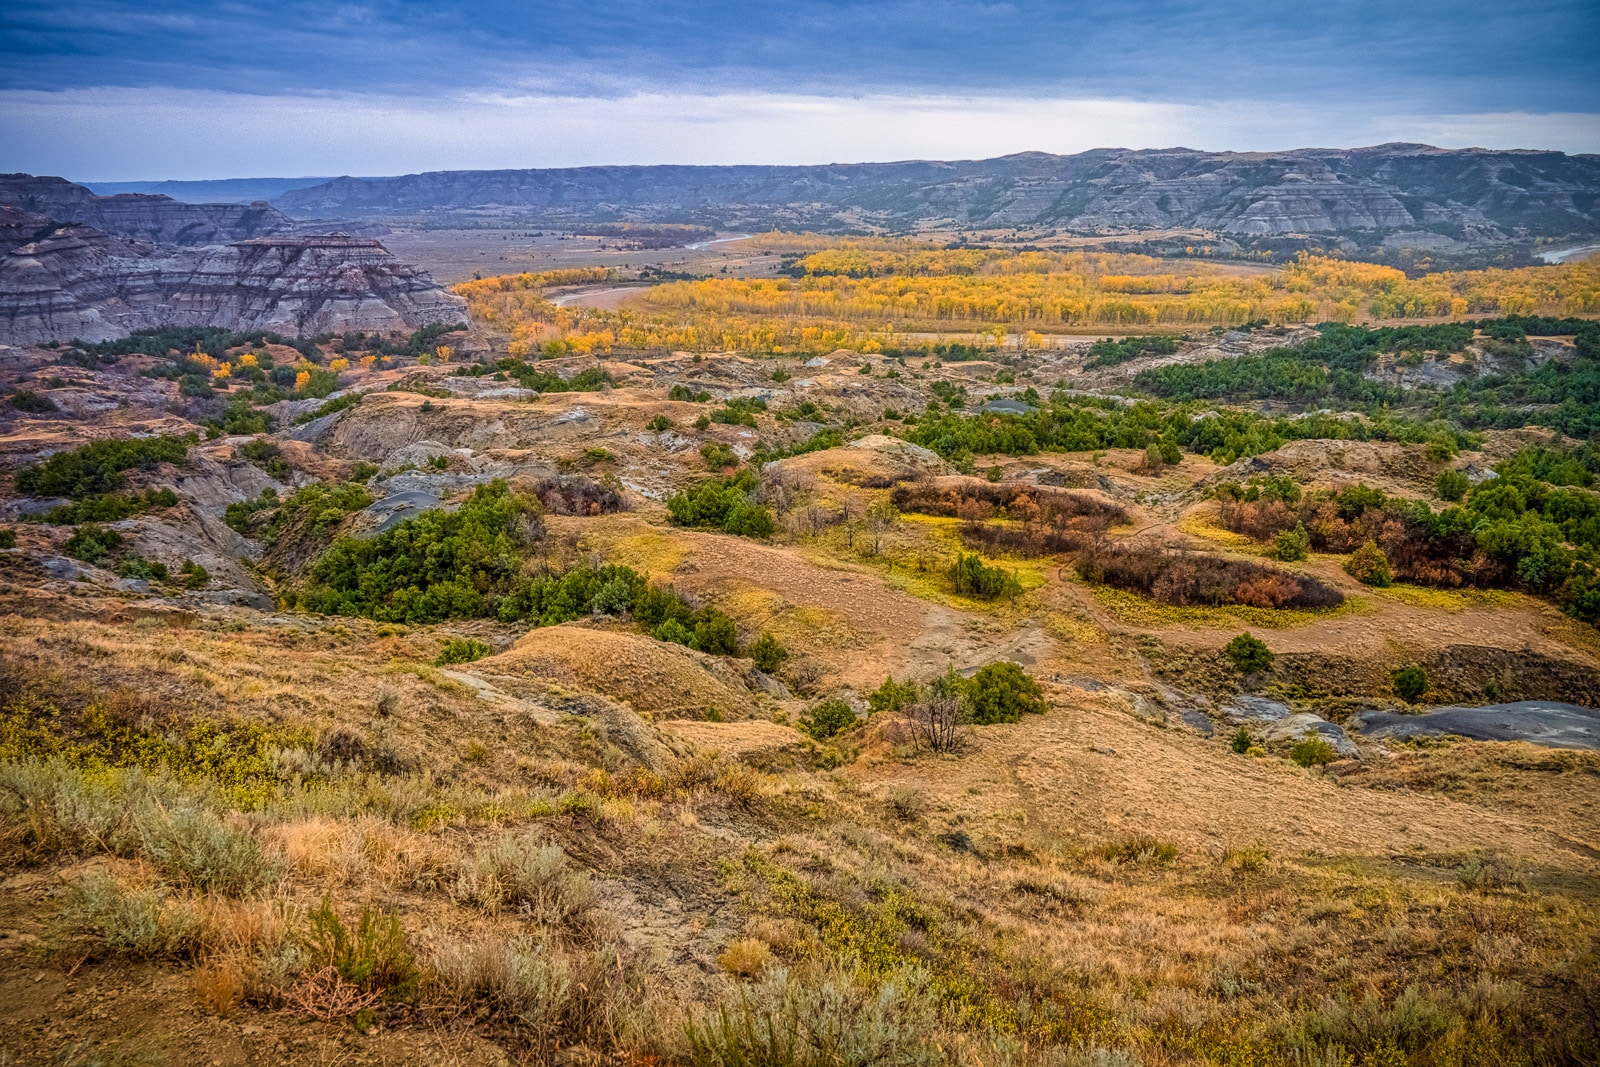 Cottonwood trees line the banks of the Little Missouri River as it winds its way through the hoodoos and rock formations in the badlands of Thodore Roosevelt National Park, North Unit, in North Dakota.